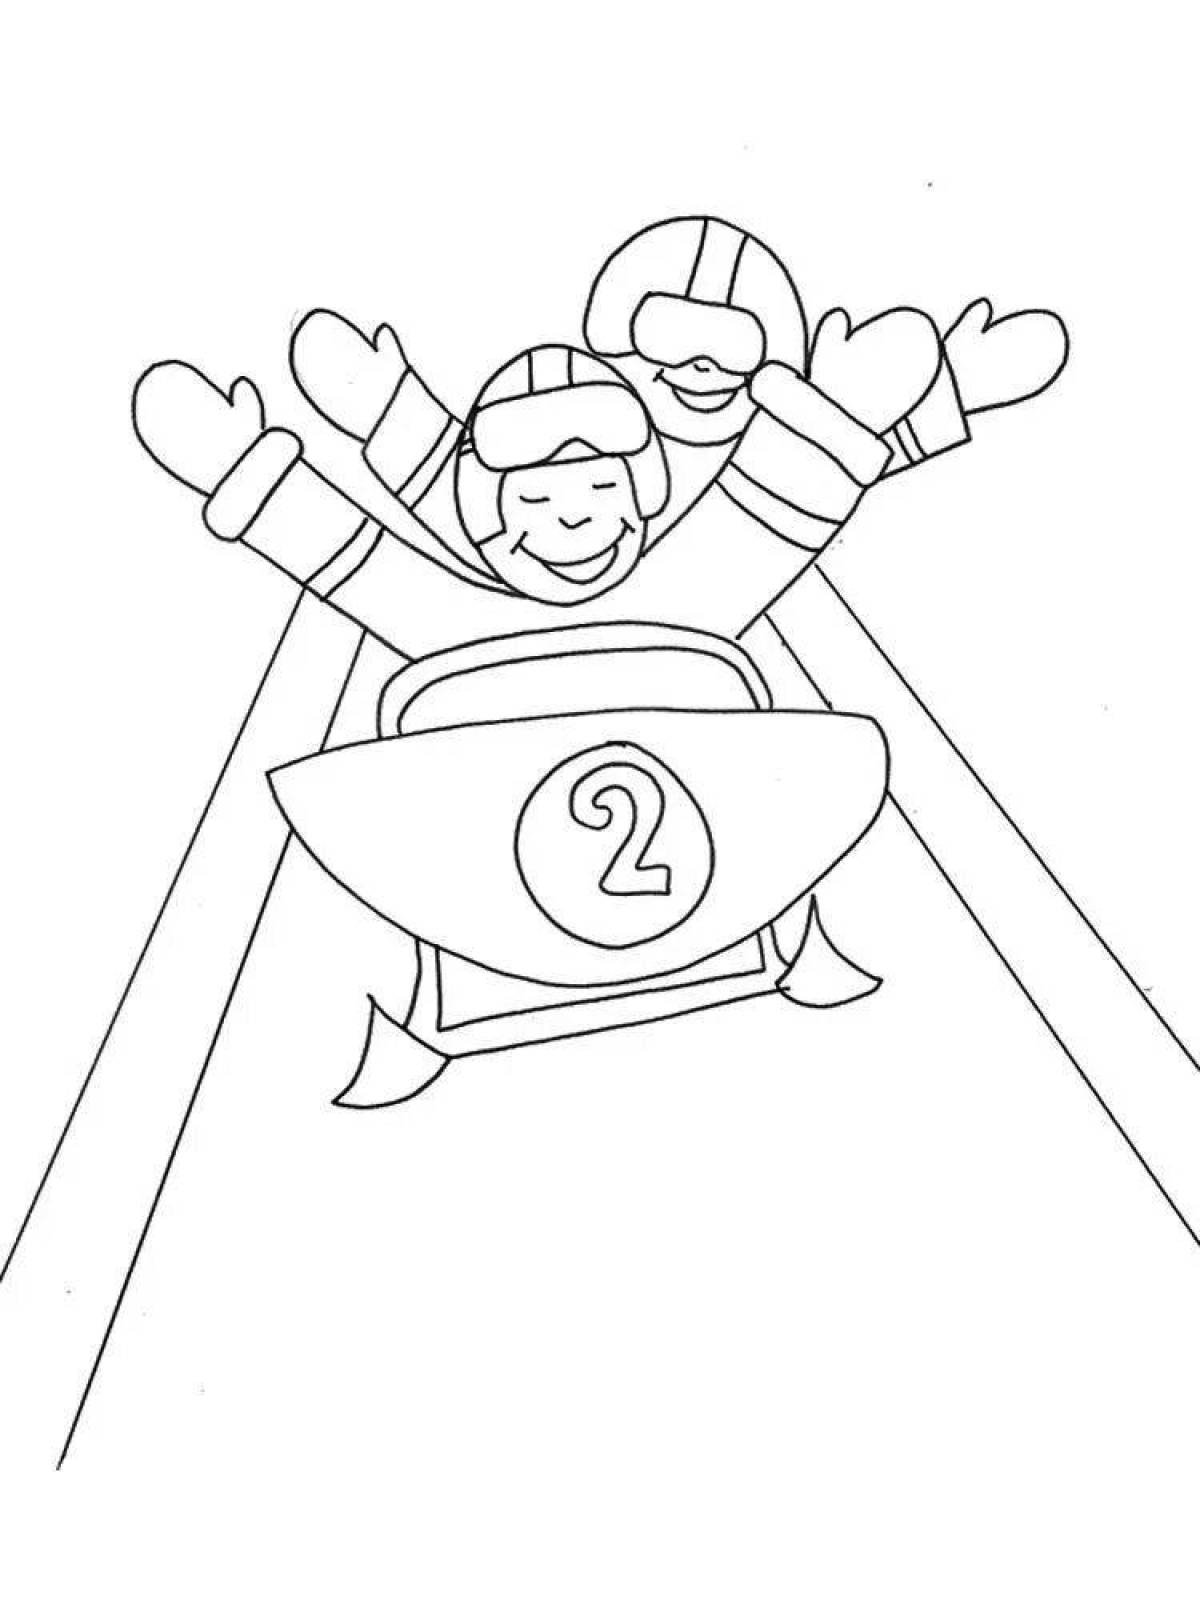 Vibrant winter sports coloring pages for kids